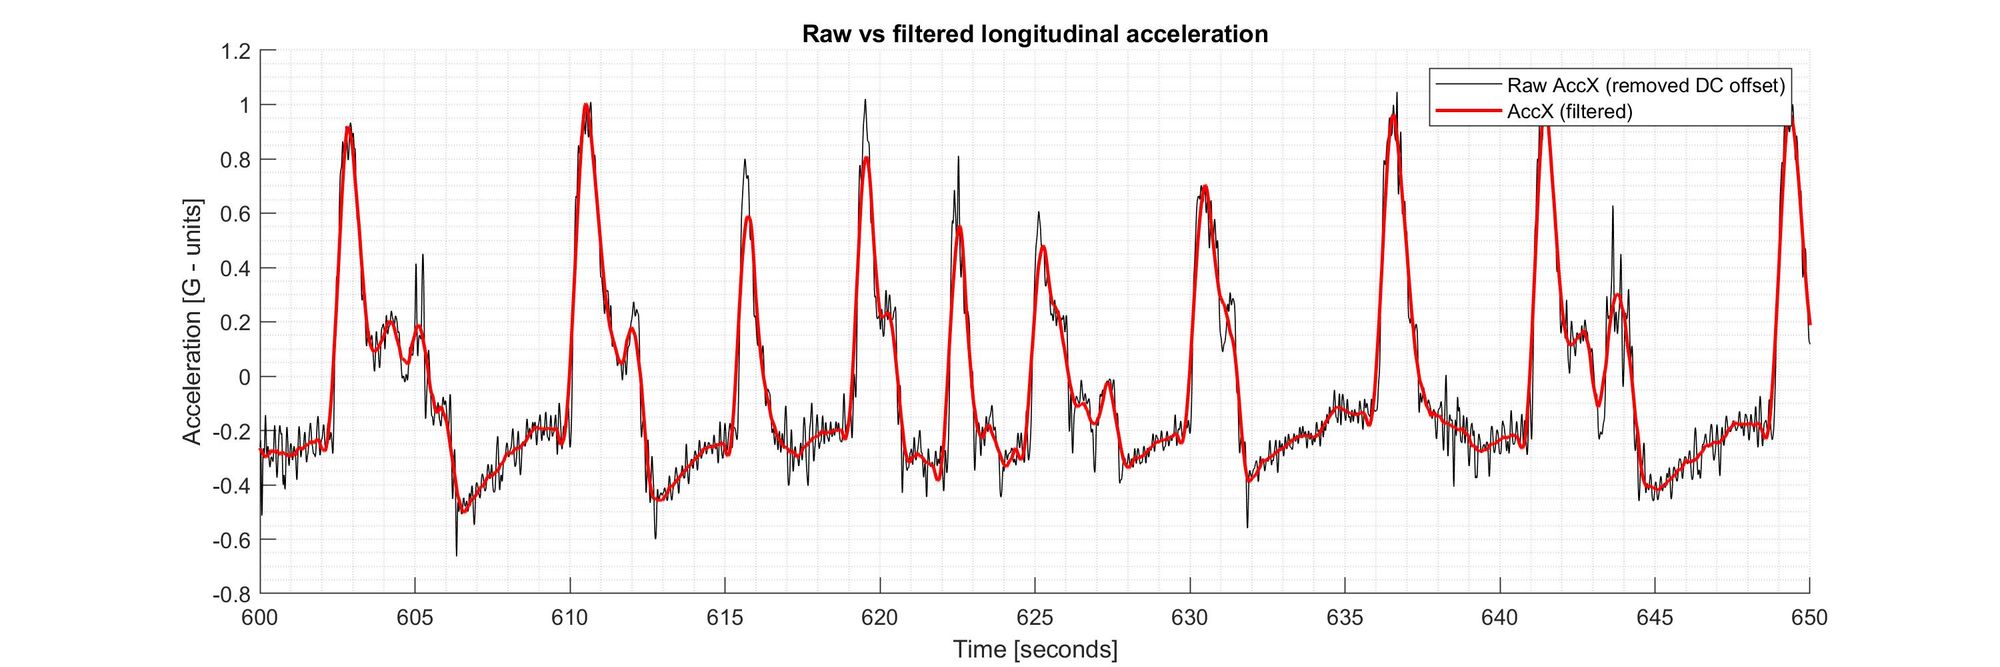 A figure showing a comparison between filtered and raw acceleration data. The raw and filtered data are overlapped